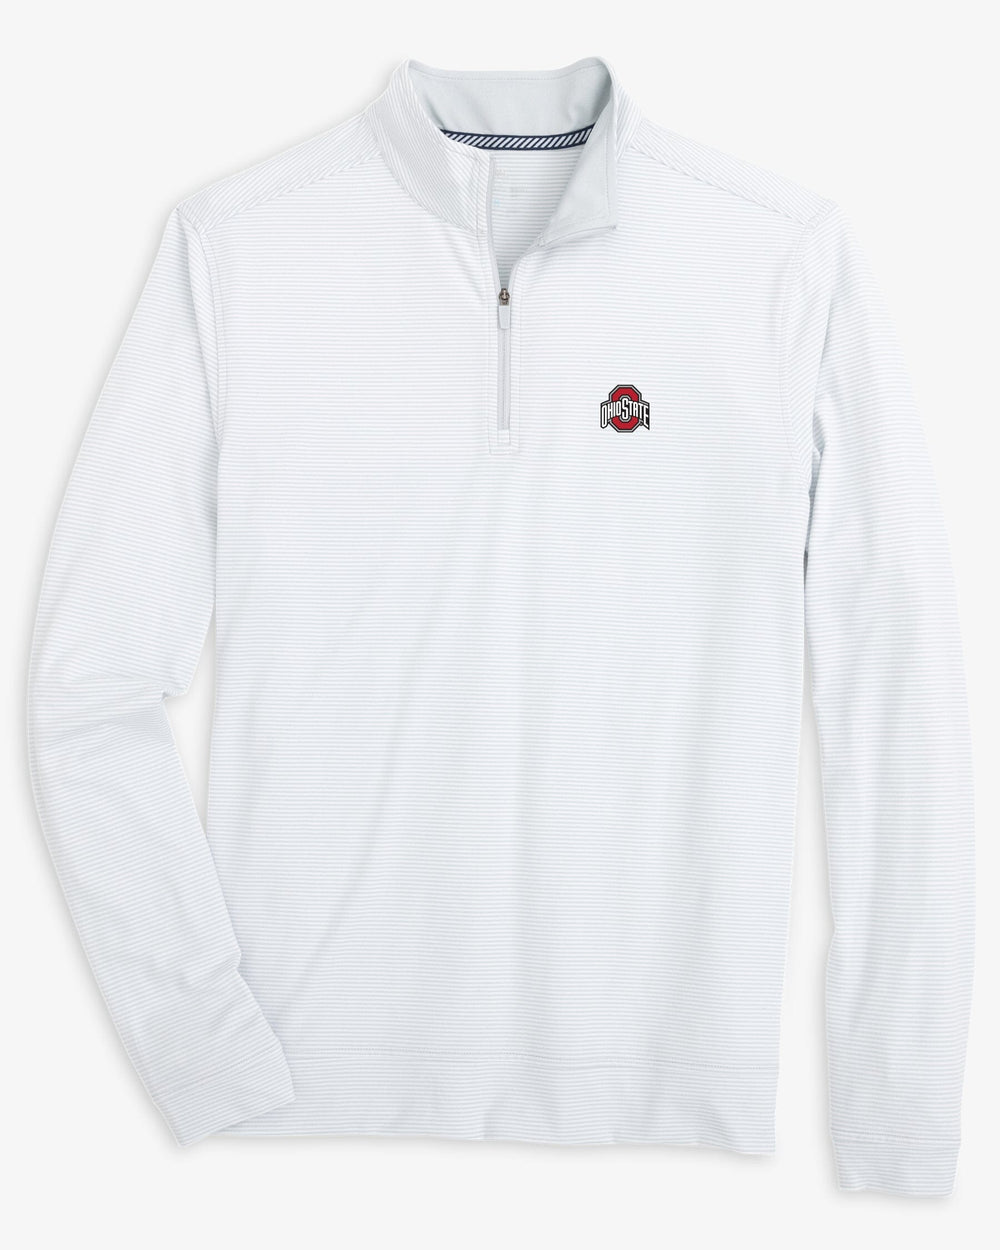 The front view of the Ohio State Buckeyes Cruiser Micro-Stripe Heather Quarter Zip by Southern Tide - Heather Slate Grey